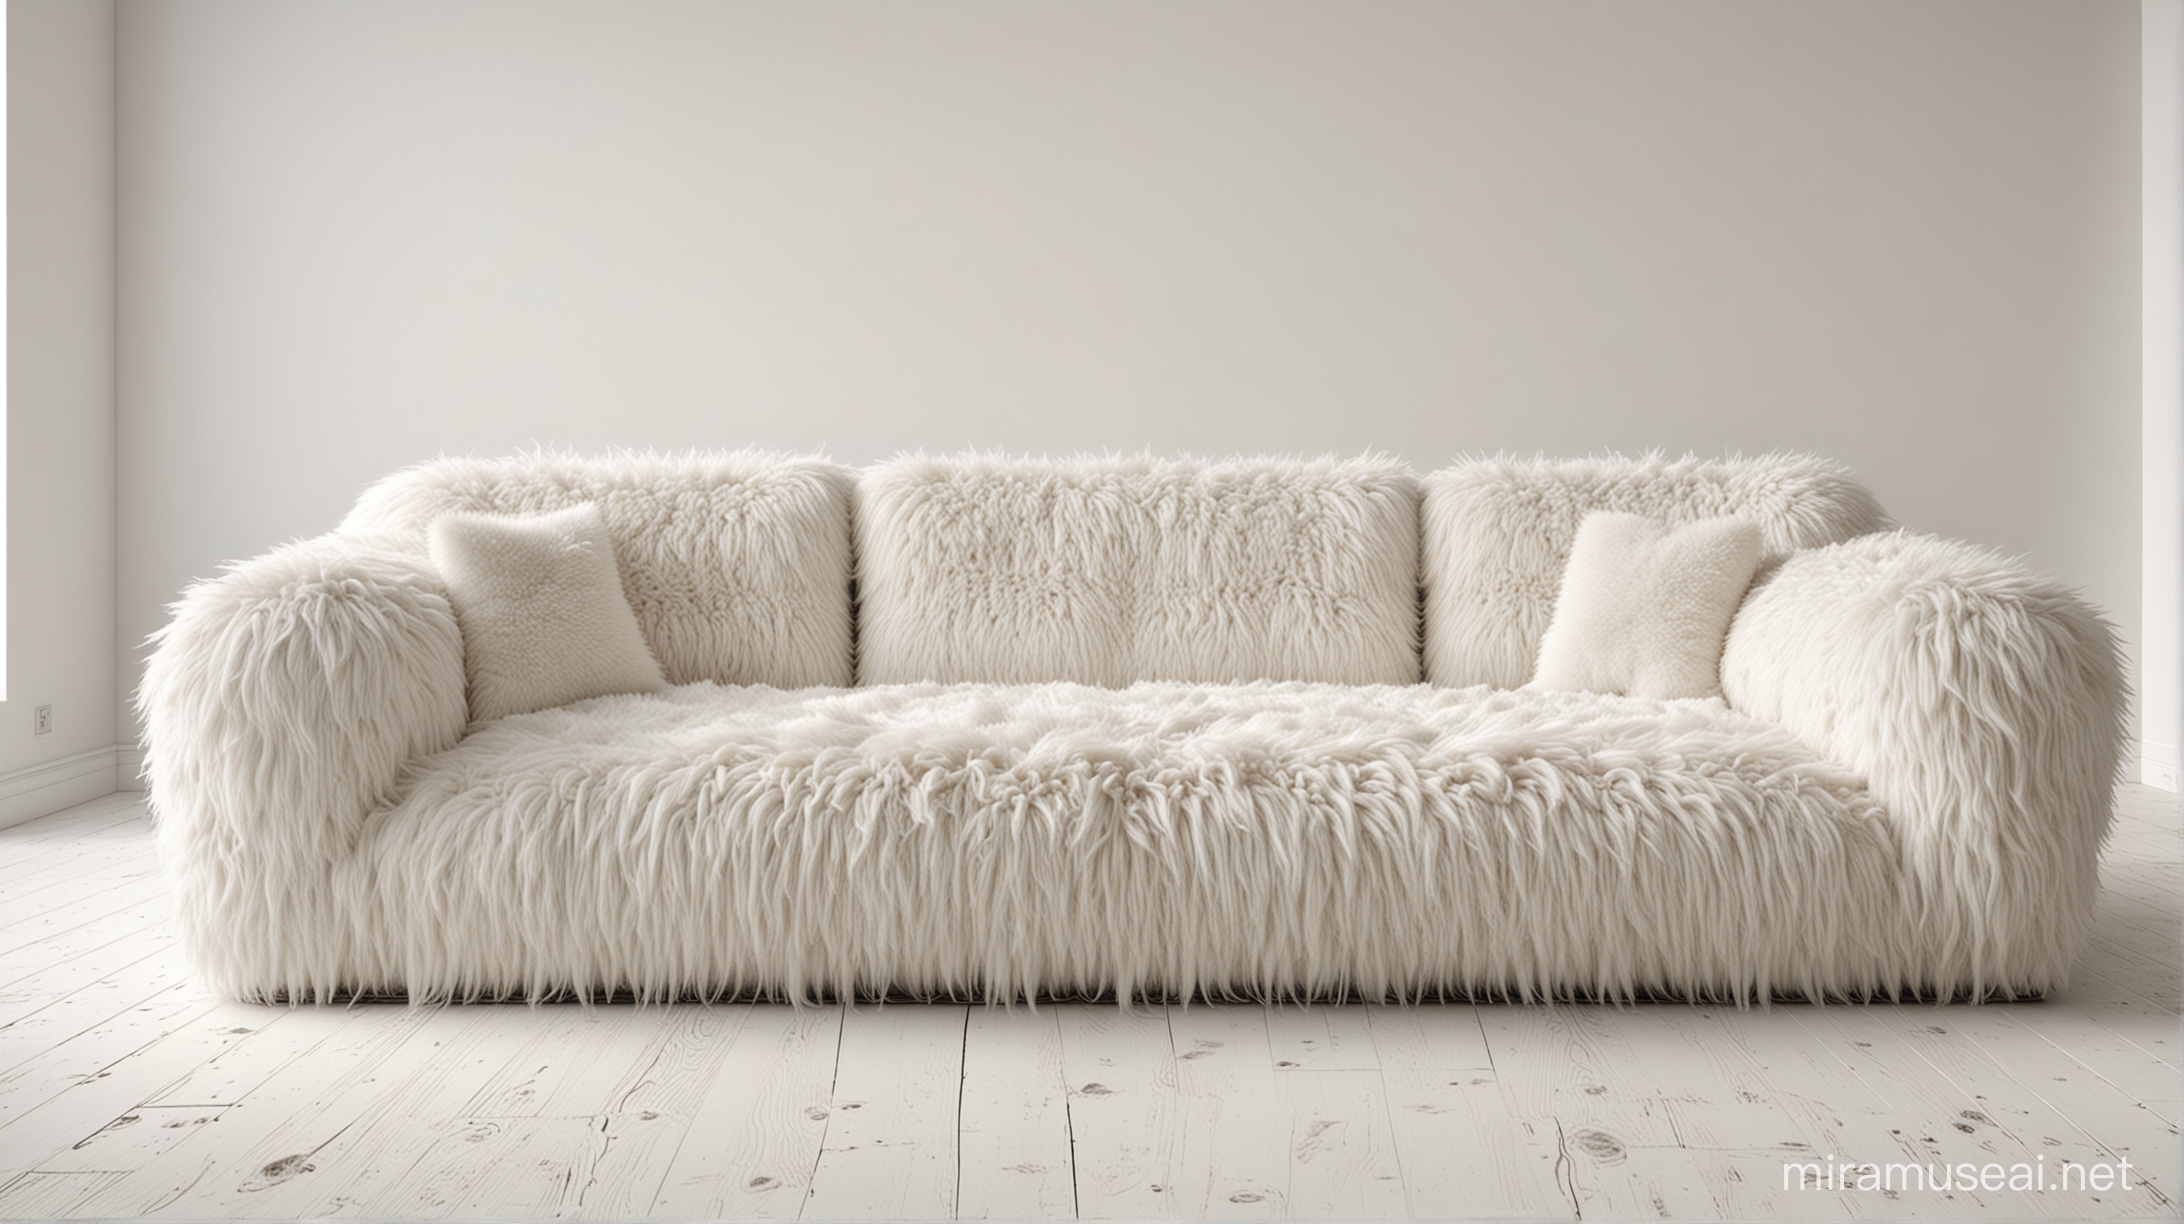 Luxurious White Fur Couch in Minimalist White Room